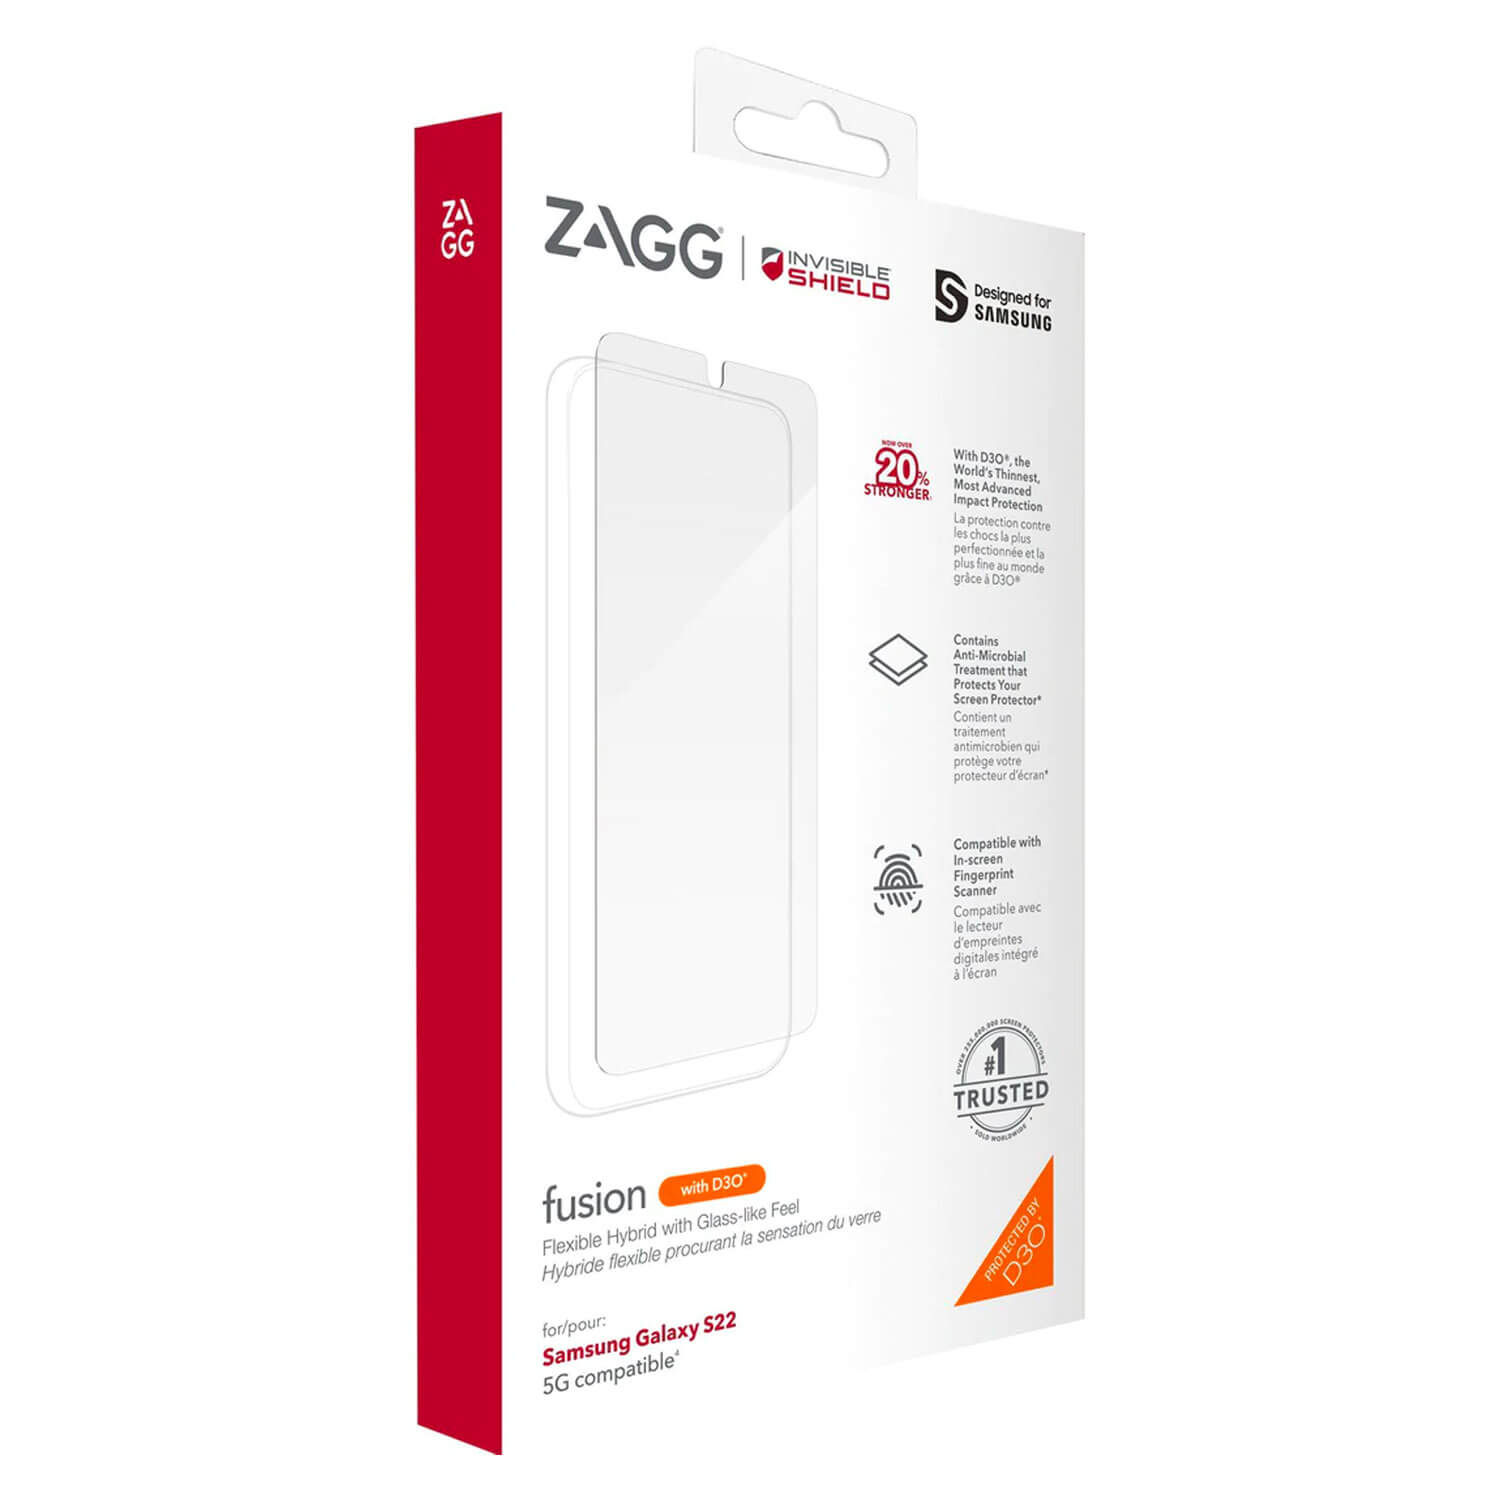 ZAGG InvisibleShield Samsung Galaxy S22 5G Screen Protector Fusion with D3O